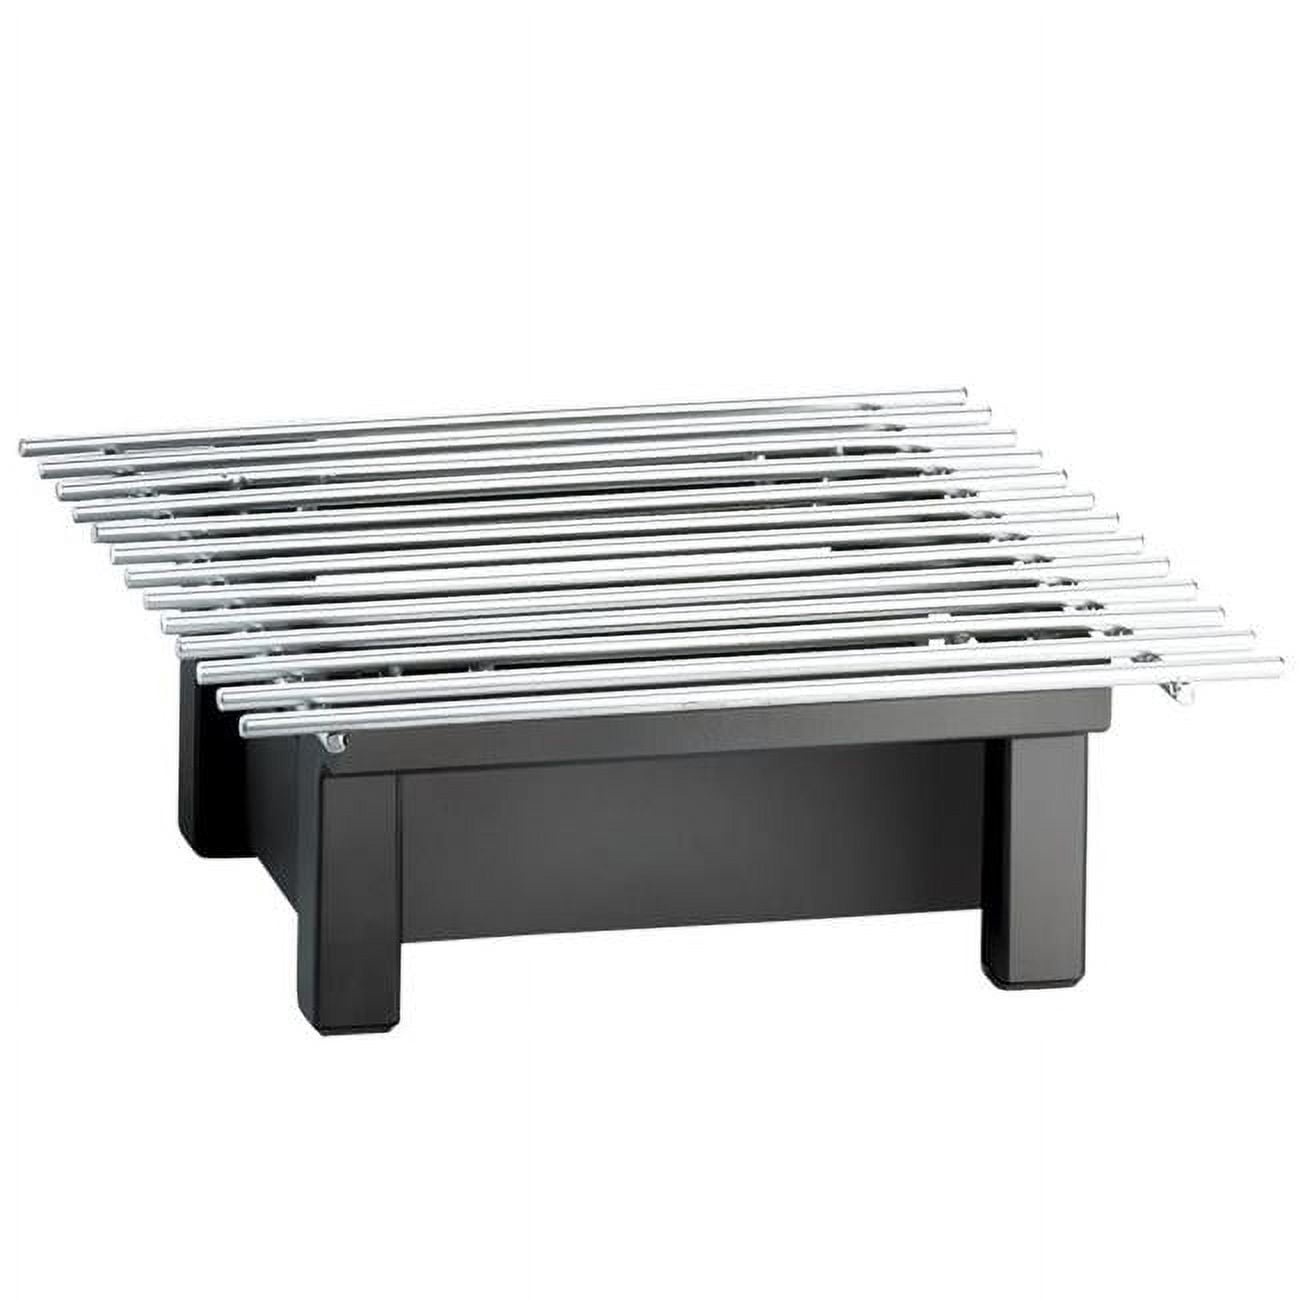 1348-12-13 One By One Chafer Griddle, Black - 12 X 12 X 4 In.